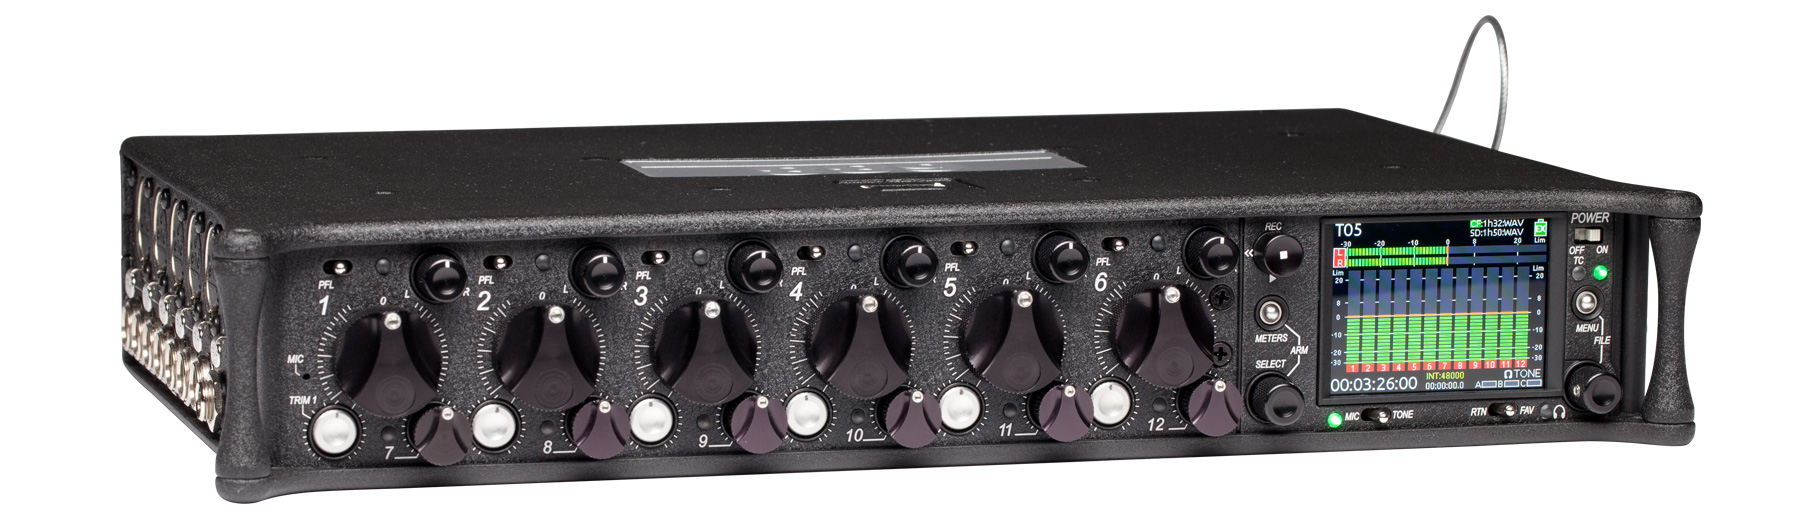 Sound Devices 688 Field Mixer